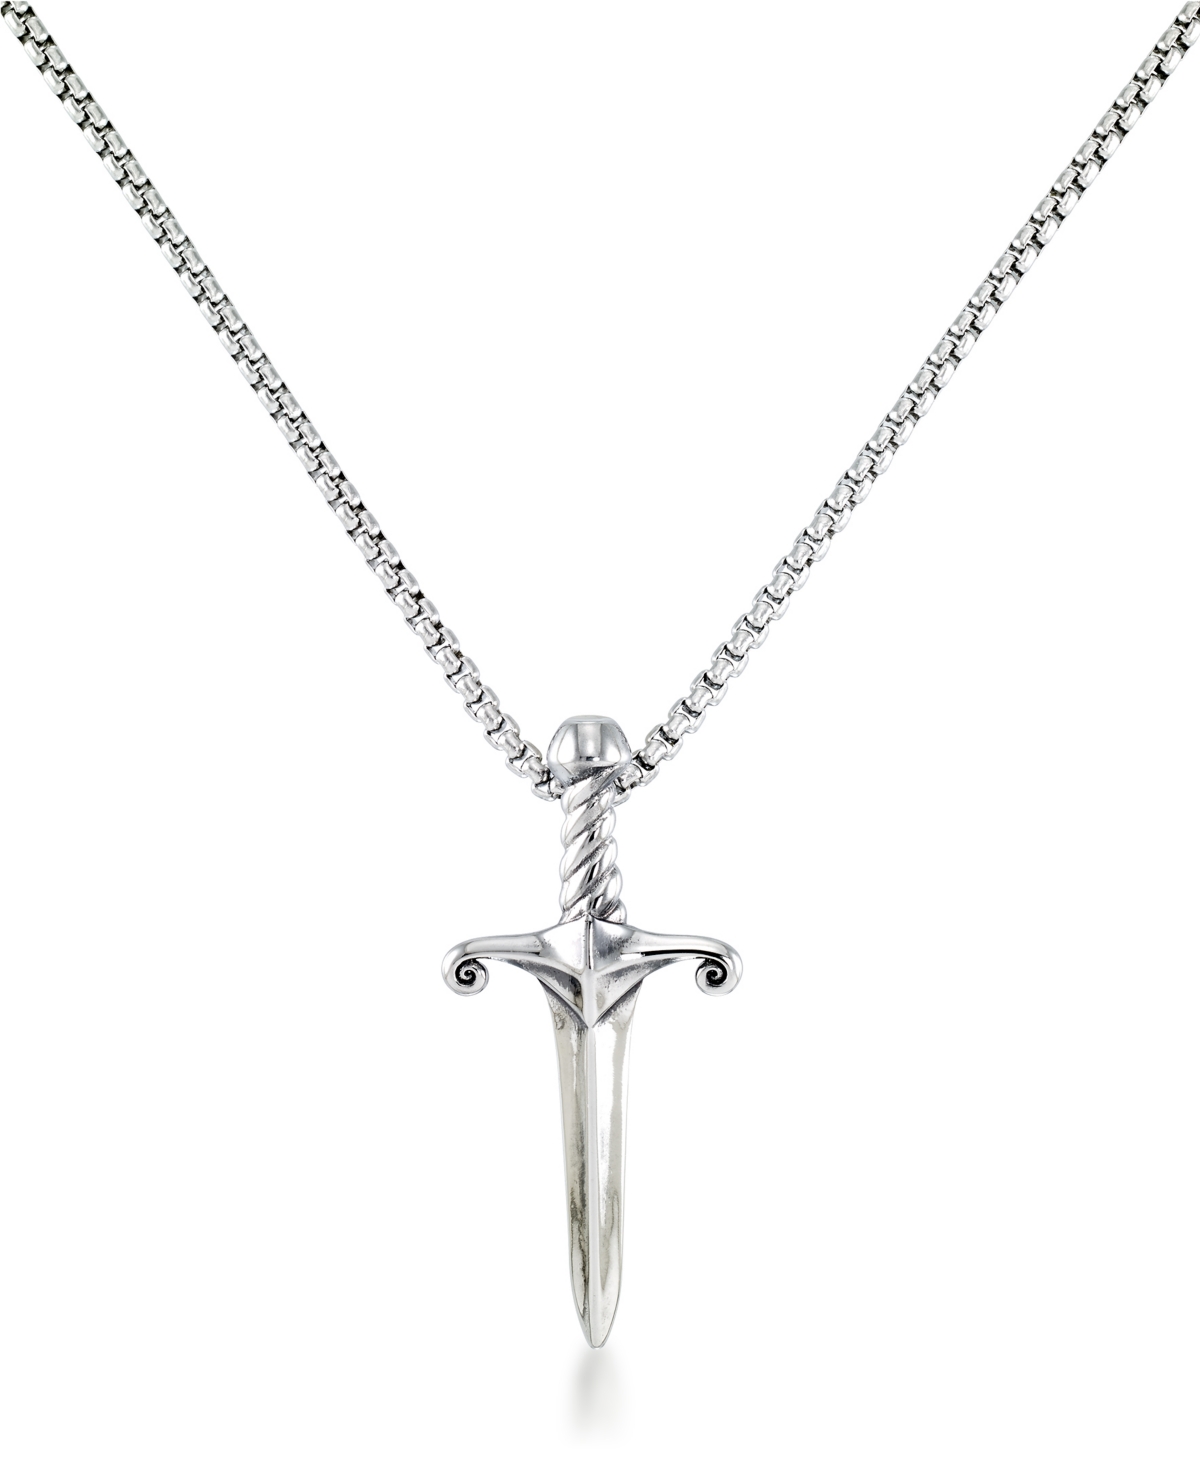 Men's Dagger 24" Pendant Necklace in Stainless Steel - Stainless Steel